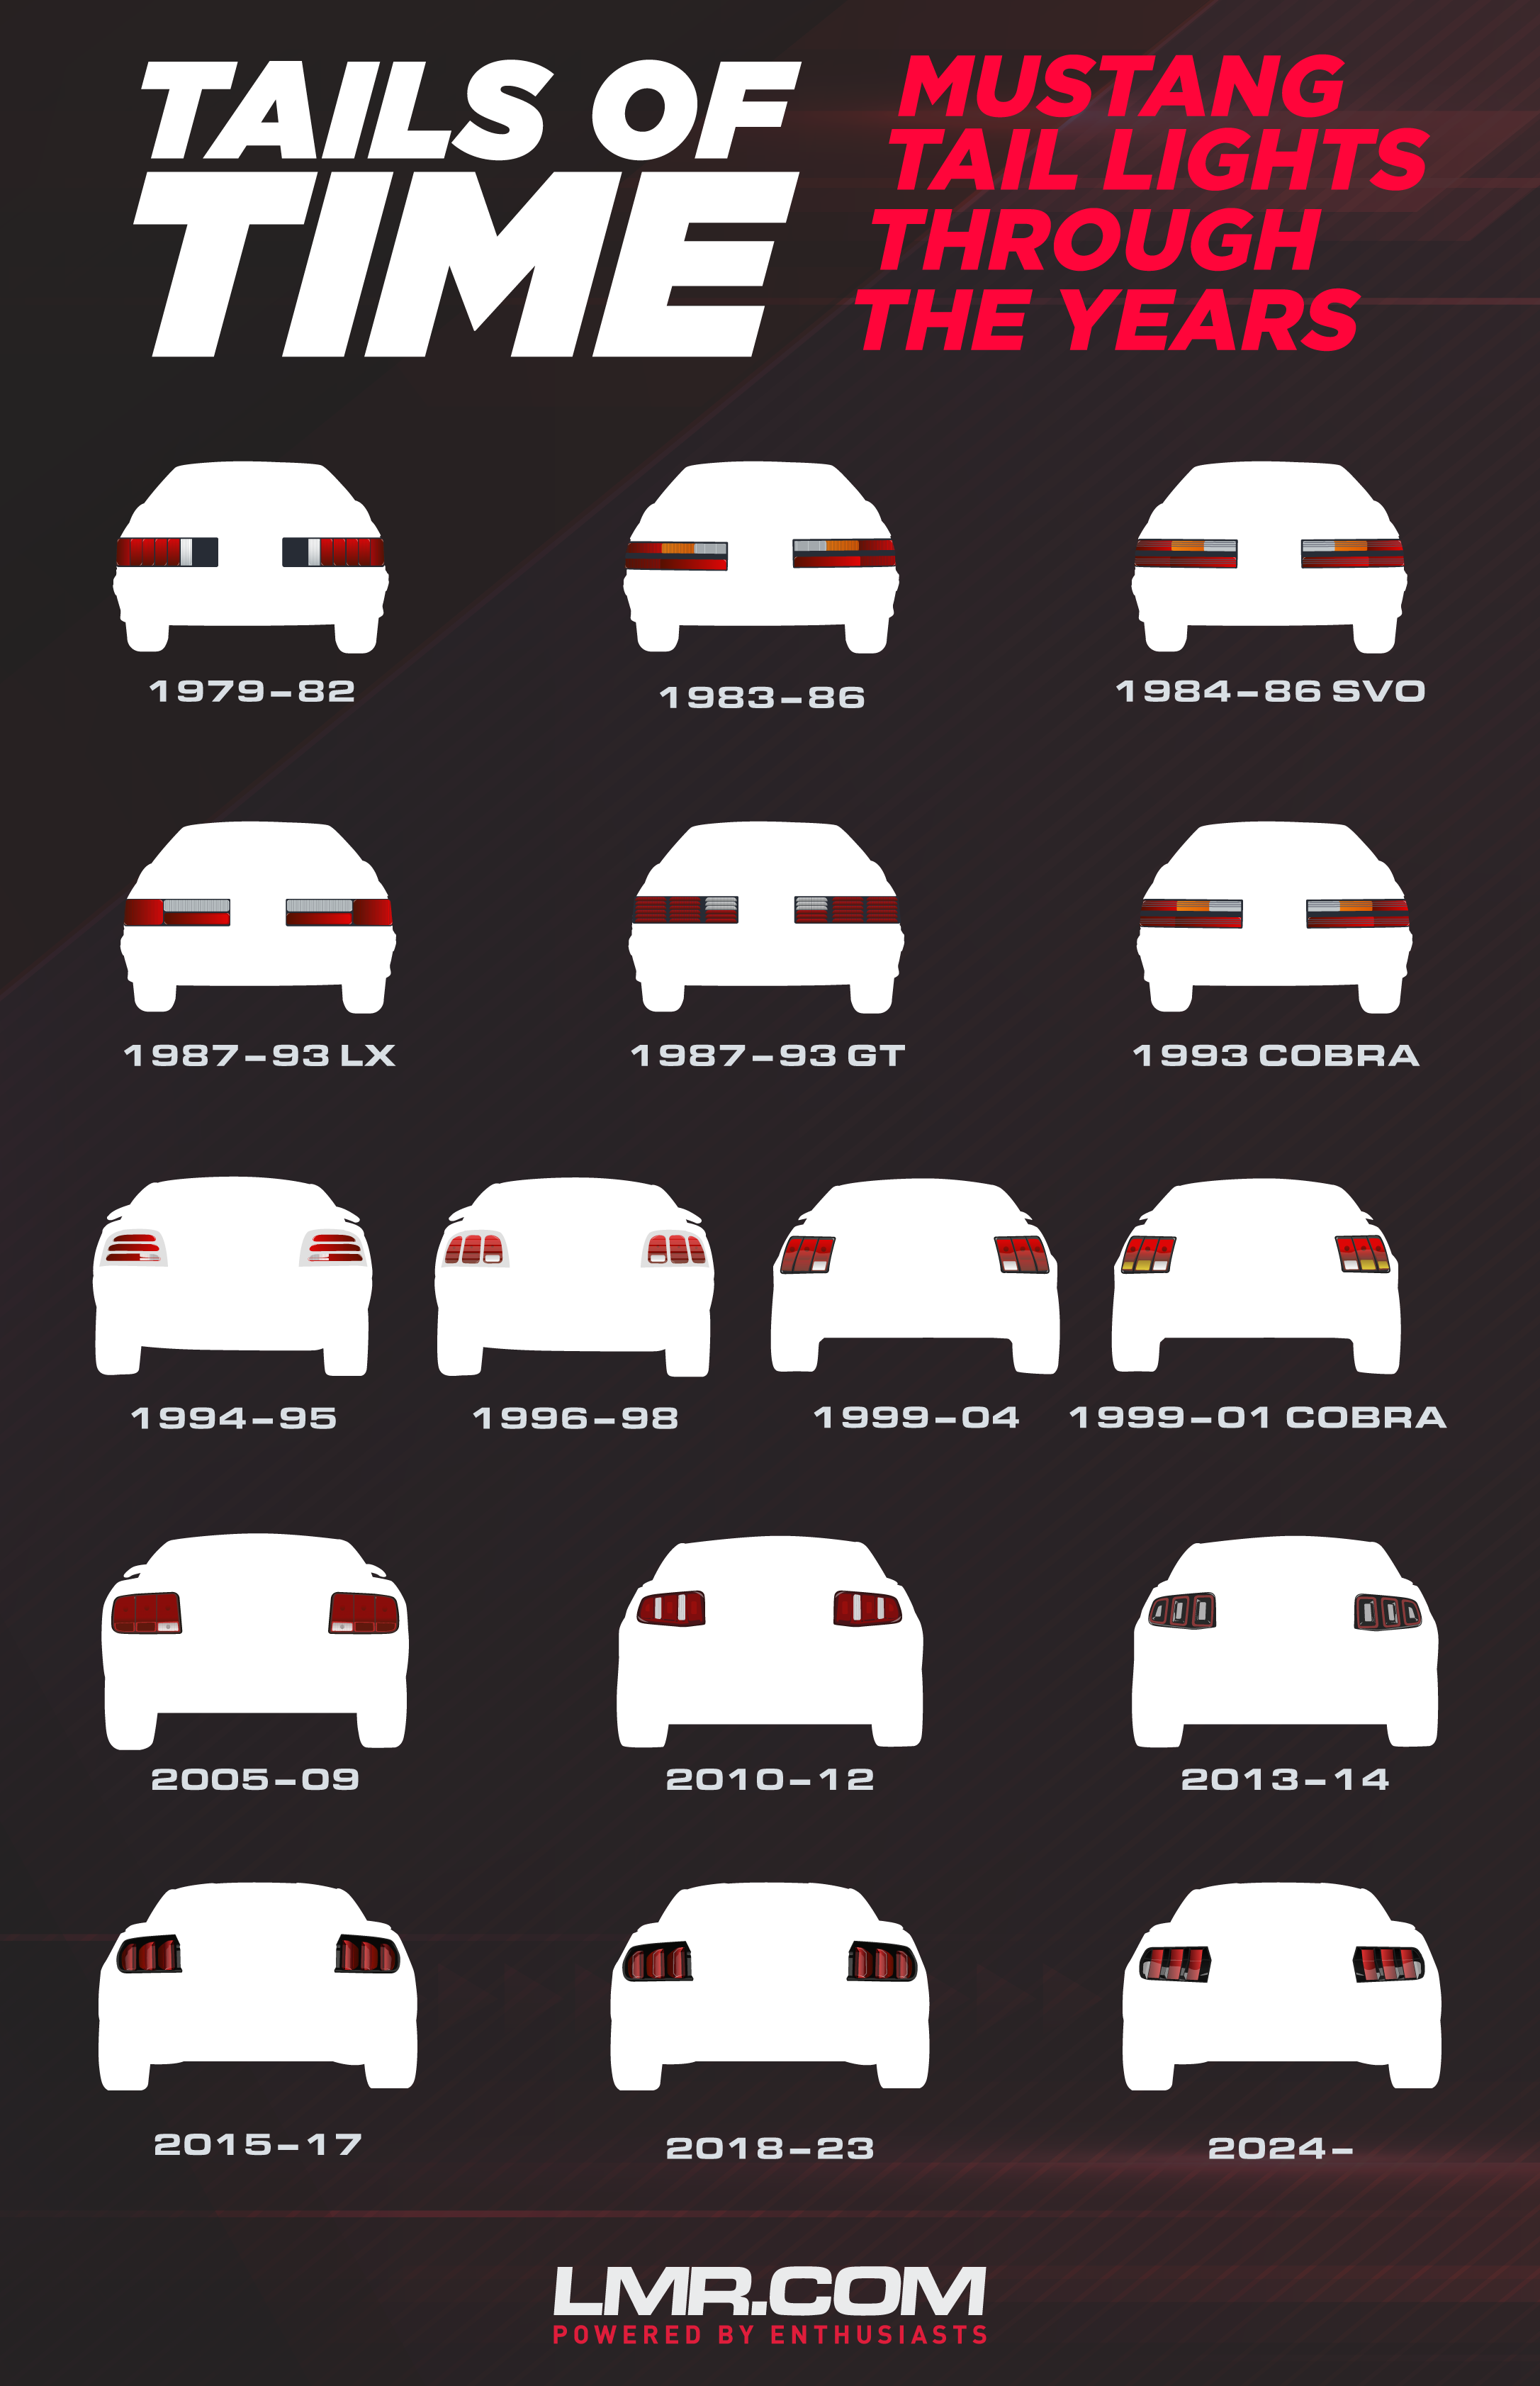 Ford Mustang Tail Lights Through The Years (1979-Present) - Ford Mustang Tail Lights Through The Years (1979-Present)